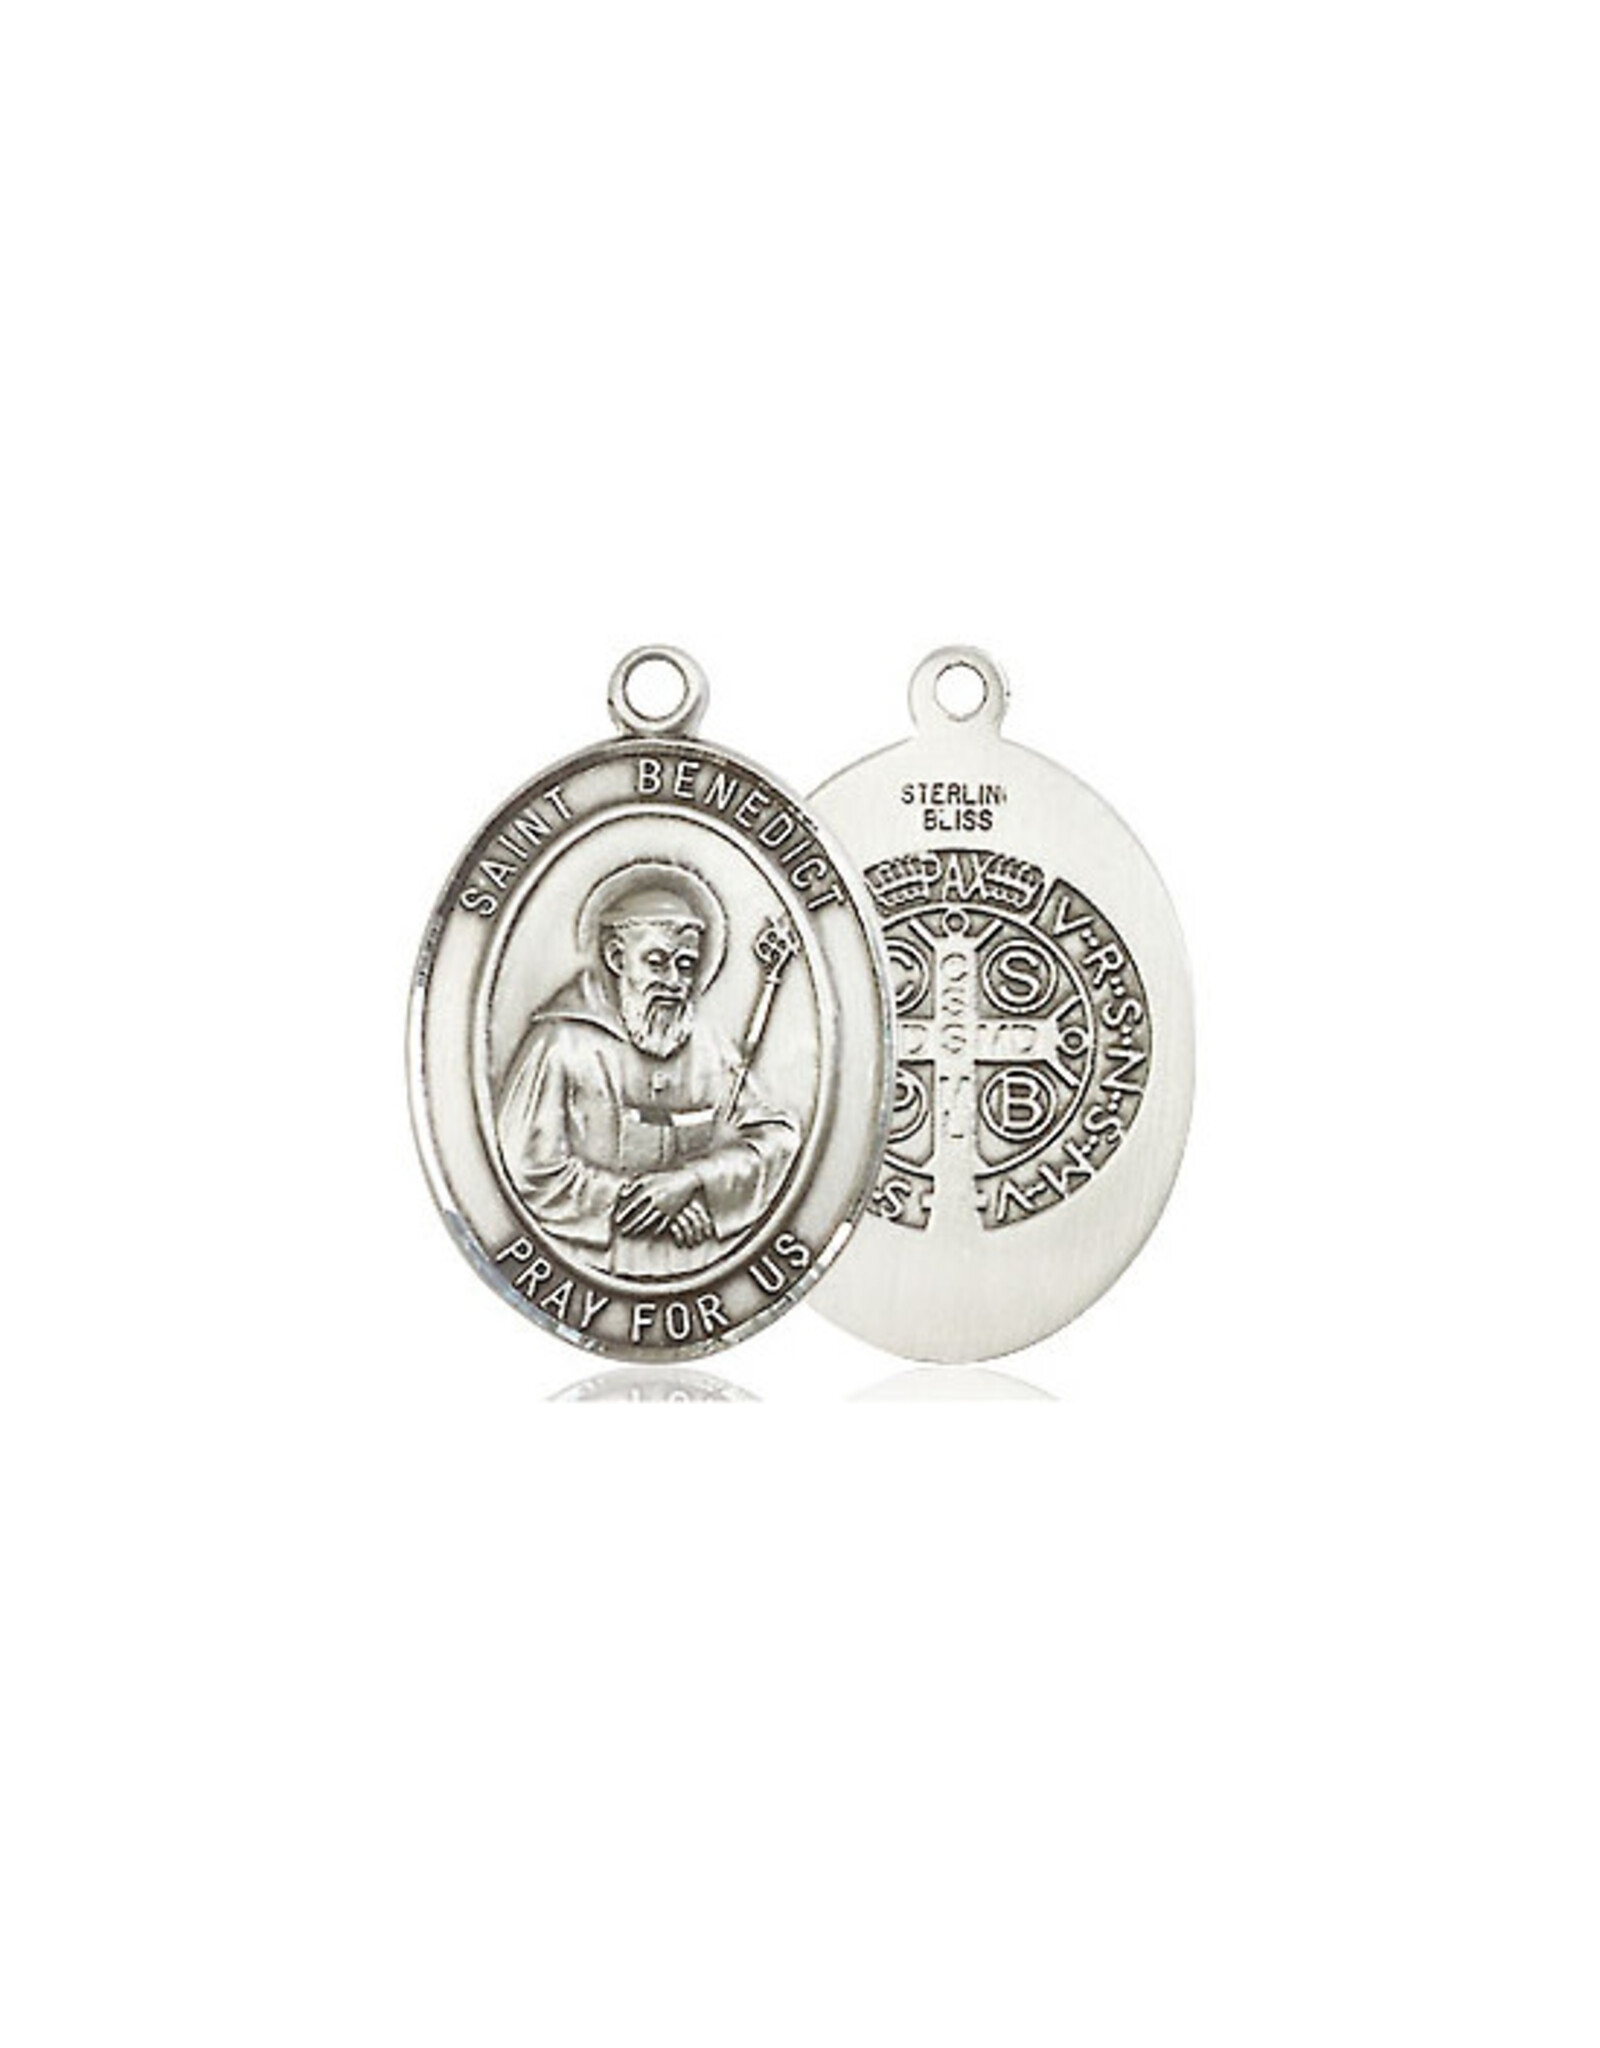 Bliss St. Benedict Patron Saint Medal, Sterling Silver (3/4")